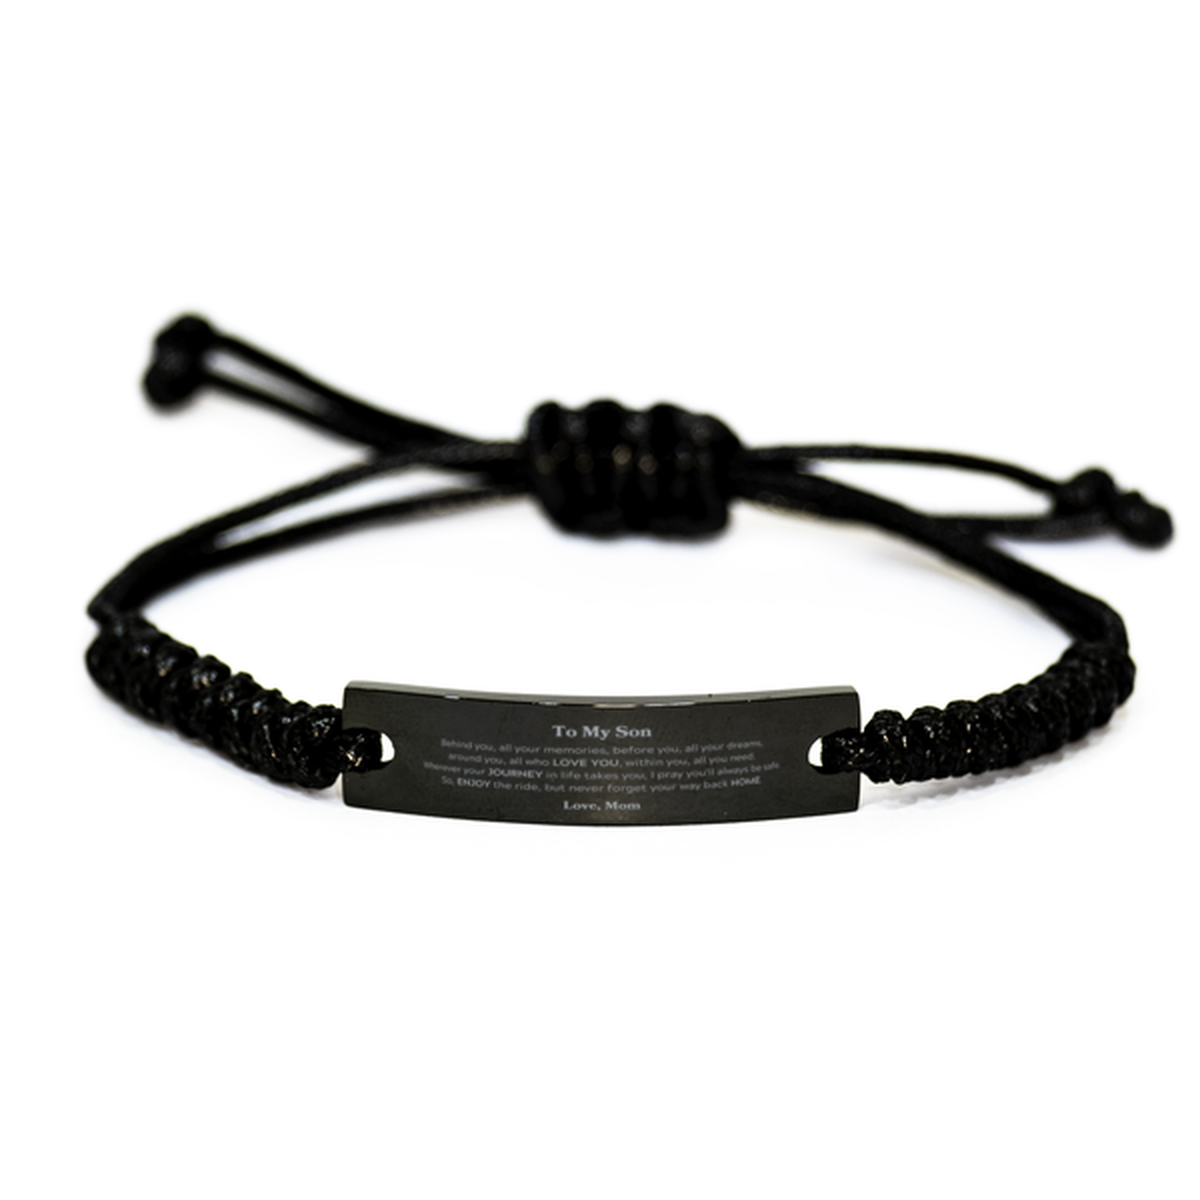 To My Son Graduation Gifts from Mom, Son Black Rope Bracelet Christmas Birthday Gifts for Son Behind you, all your memories, before you, all your dreams. Love, Mom